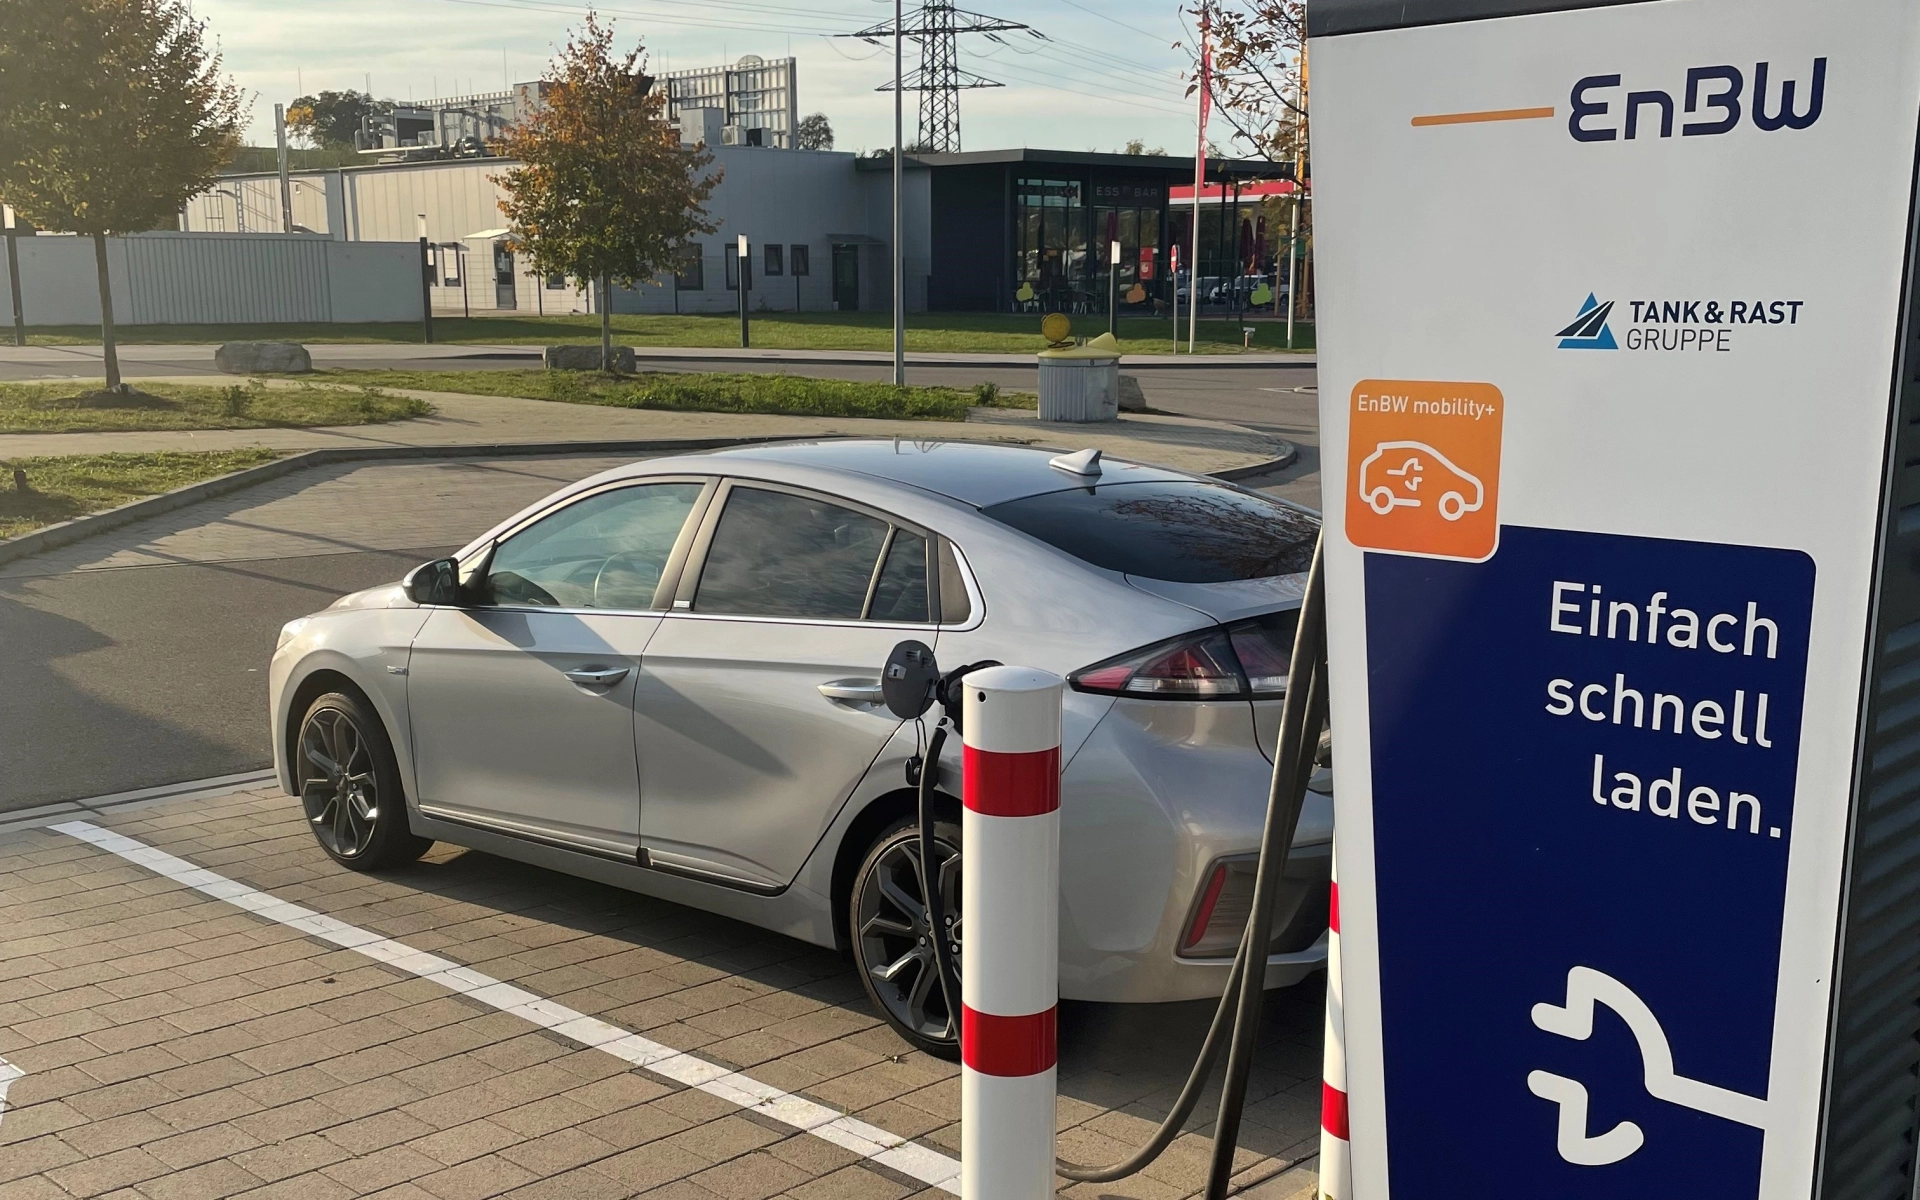 Electric car at the EnBW charging point